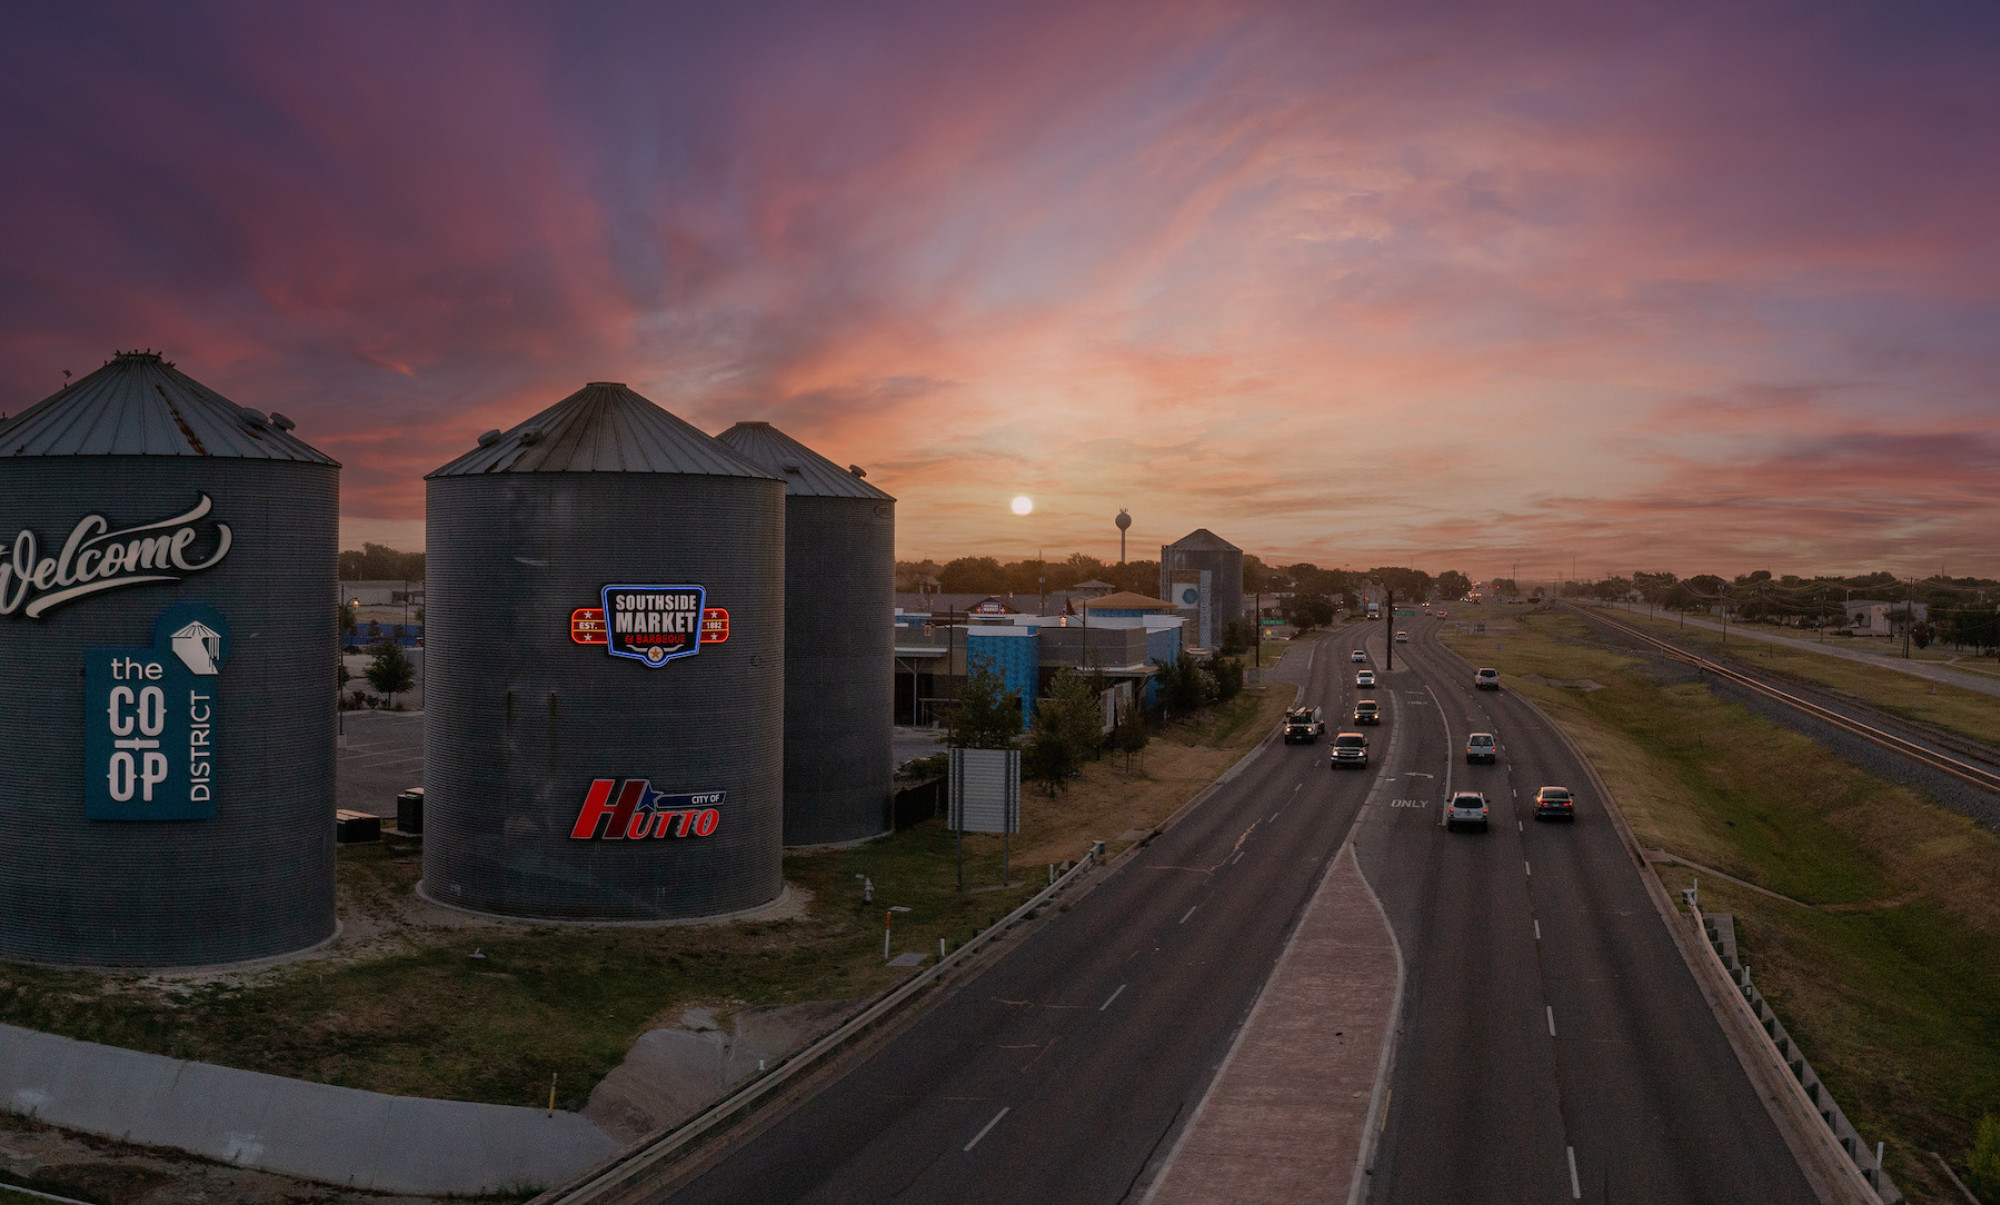 Sunset photo of Hutto Silos and adjacent highway